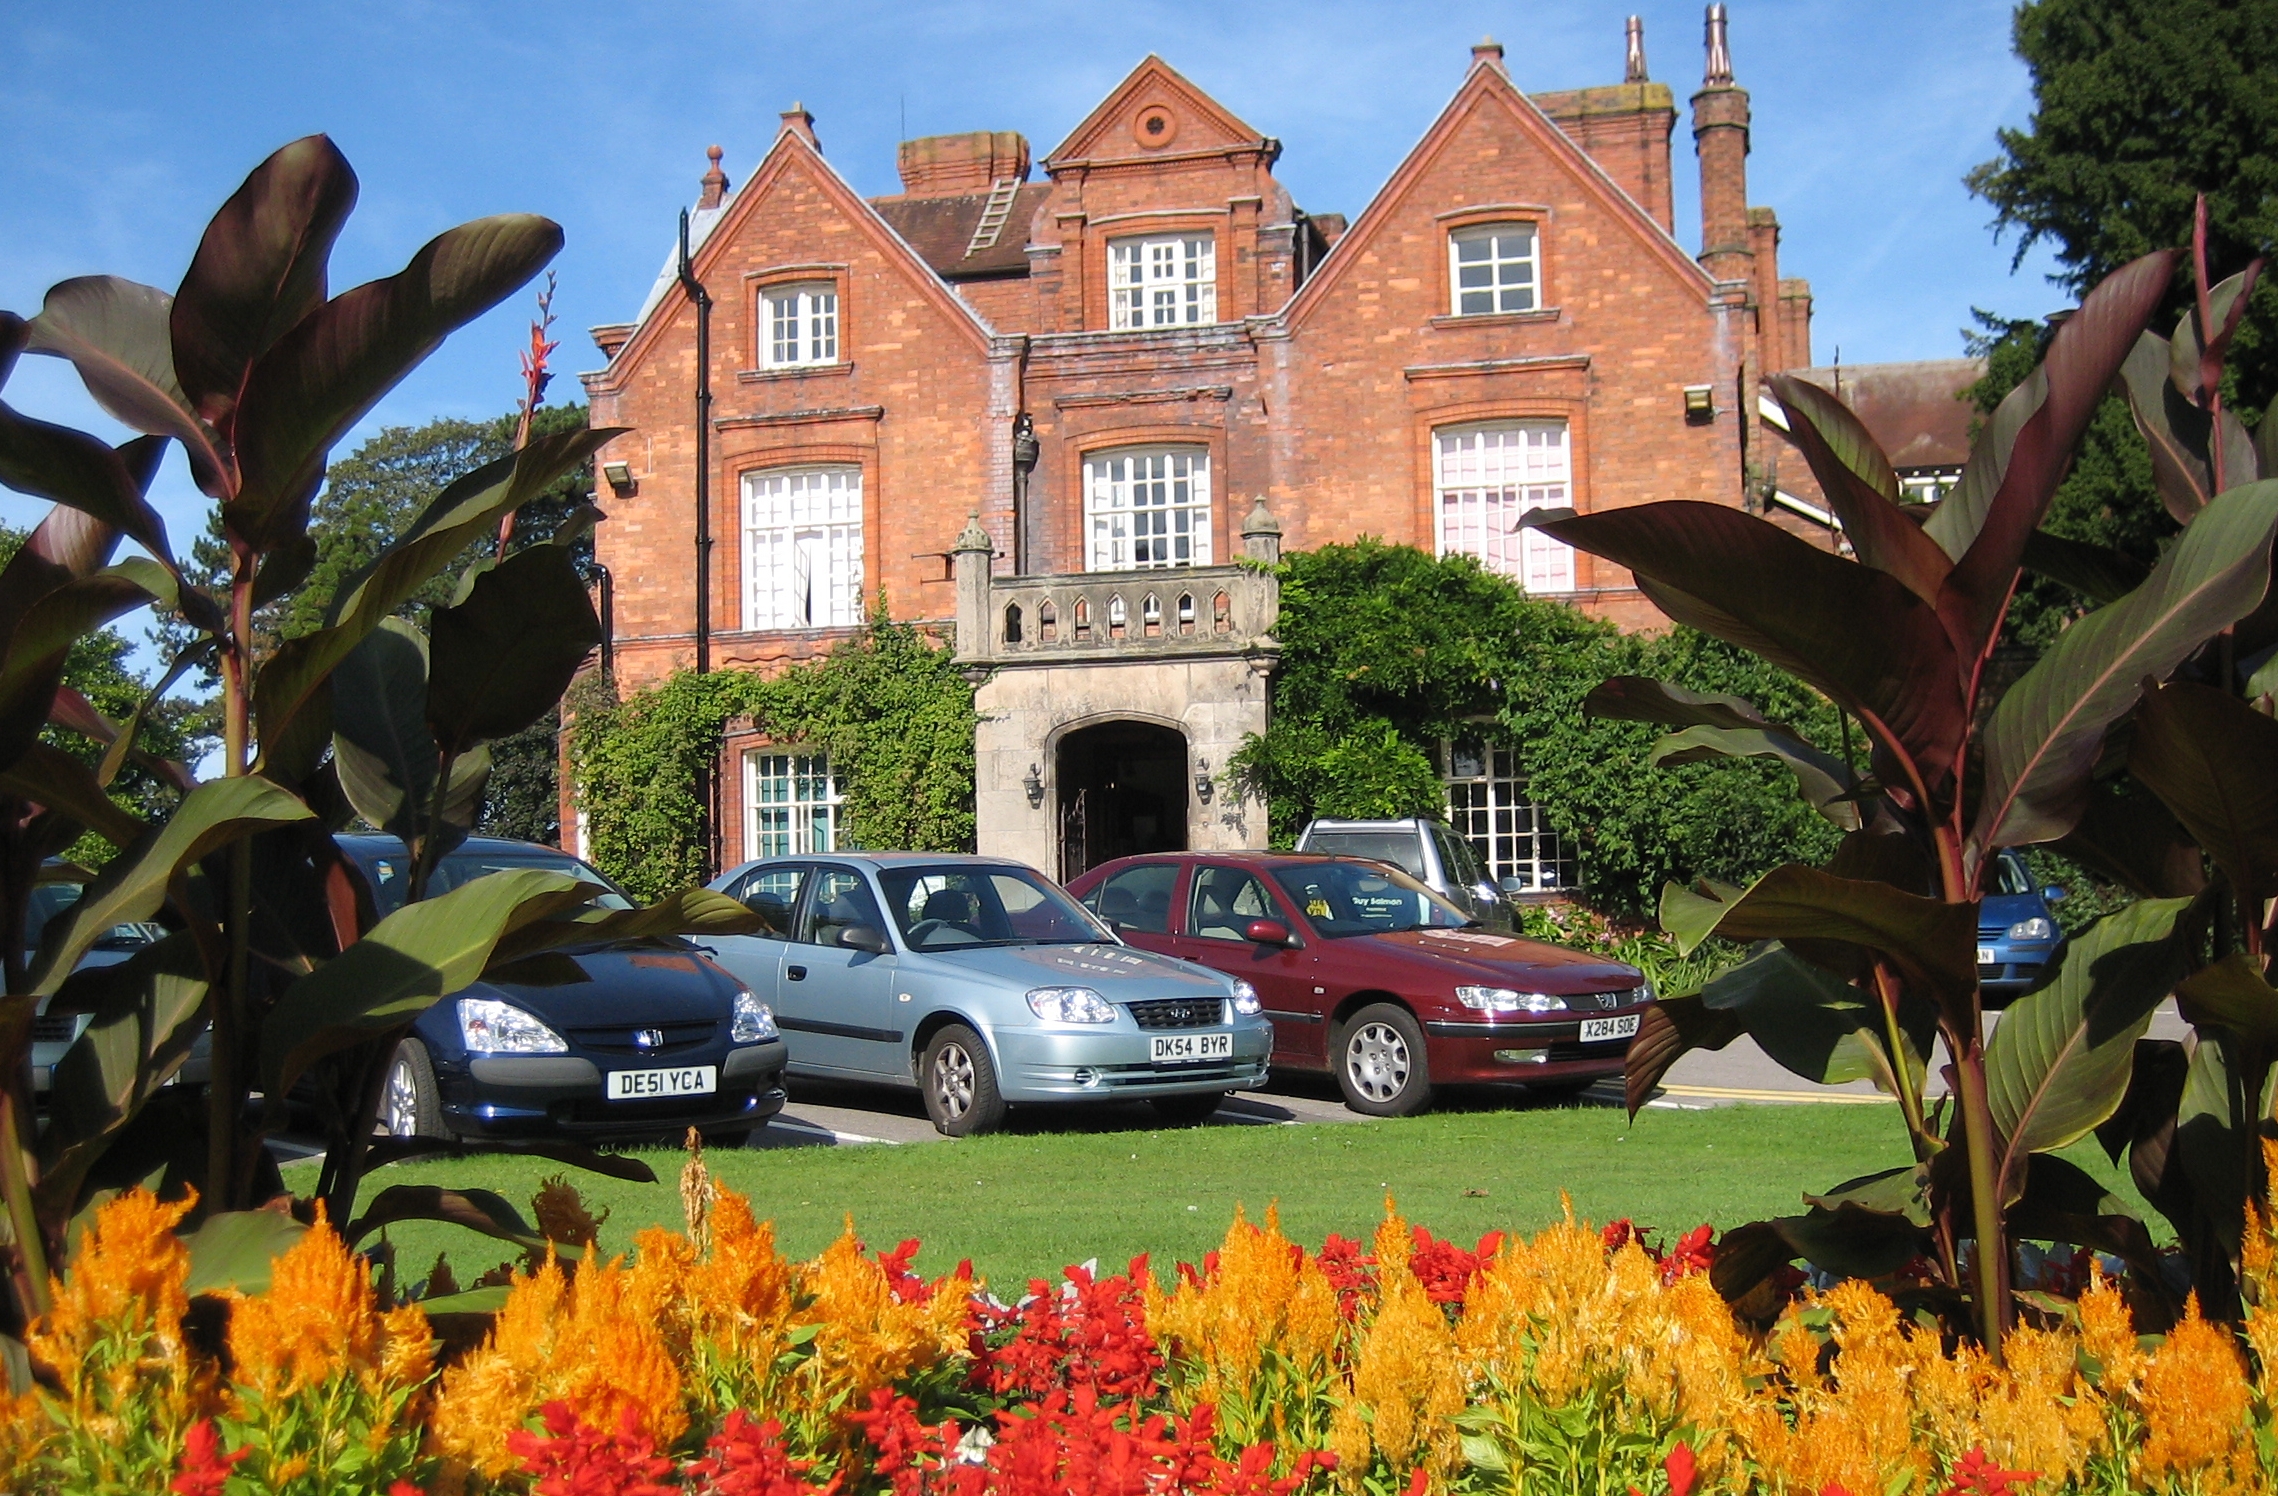 Reaseheath College - Old Hall Building